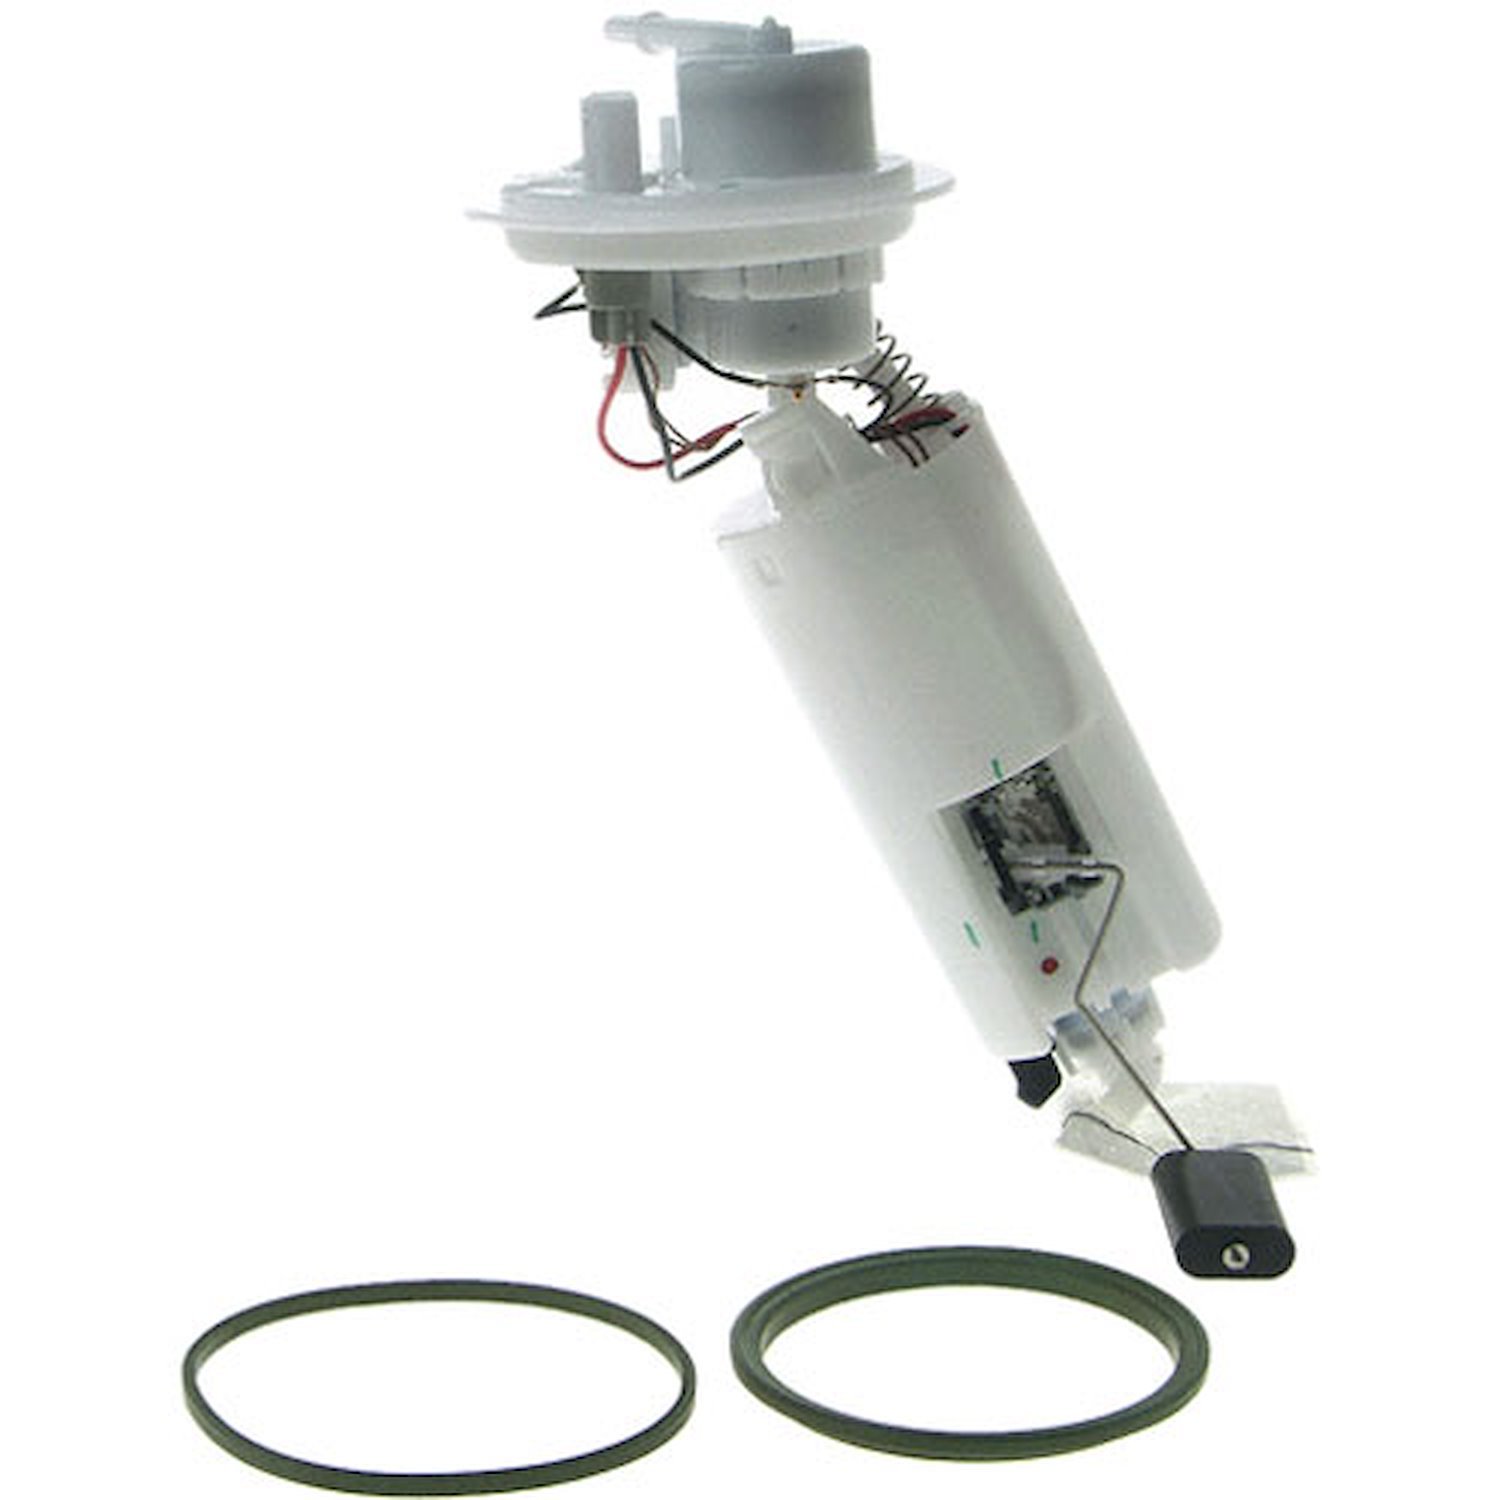 OE Chrysler/Dodge Replacement Electric Fuel Pump Module Assembly 2004-07 Chrysler Town & Country 2.4L/3.3L/3.8L V6